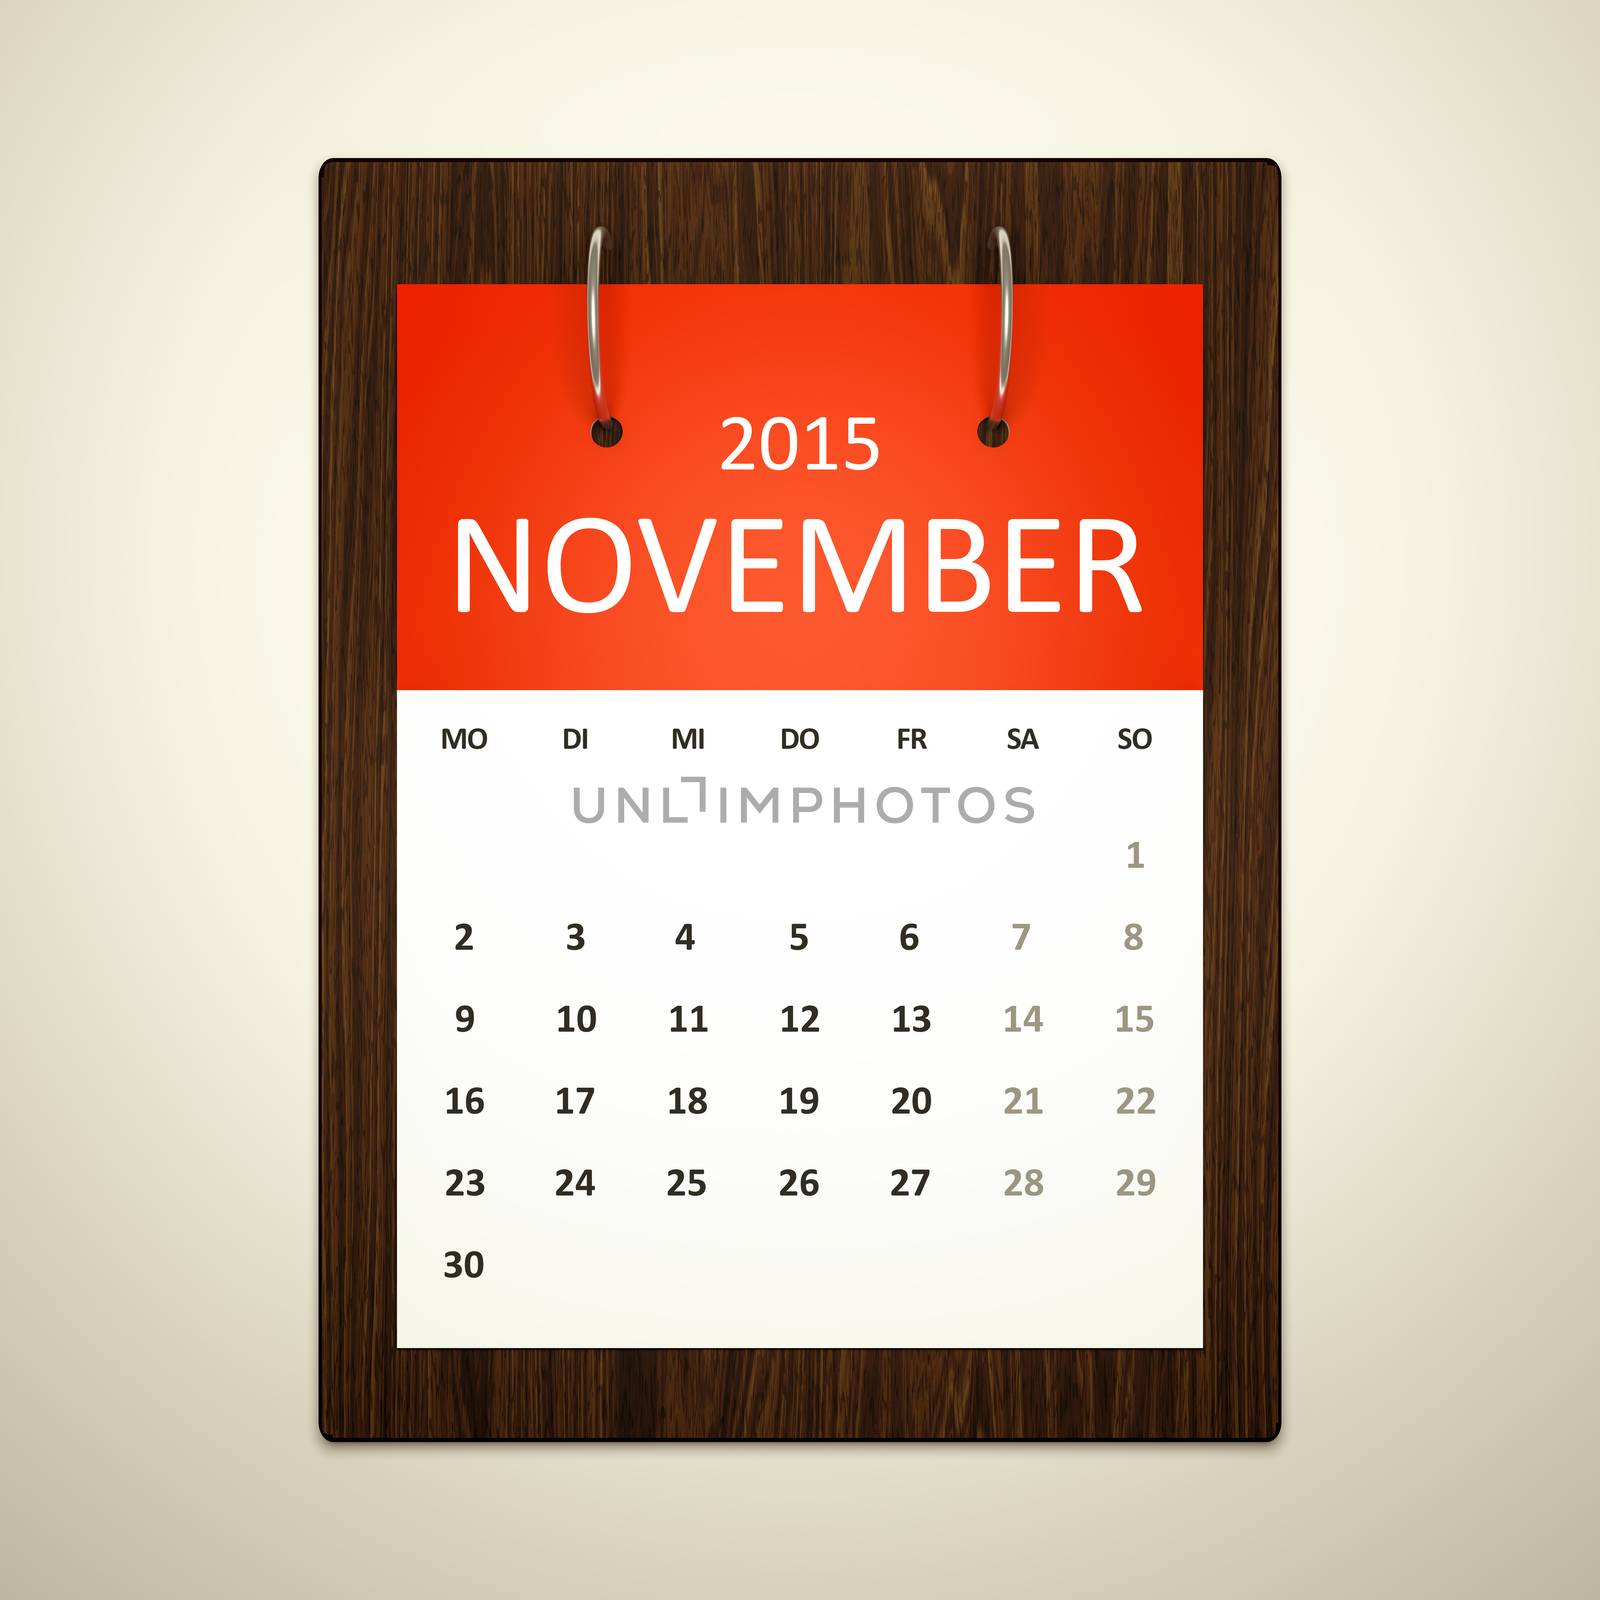 An image of a german calendar for event planning november 2015